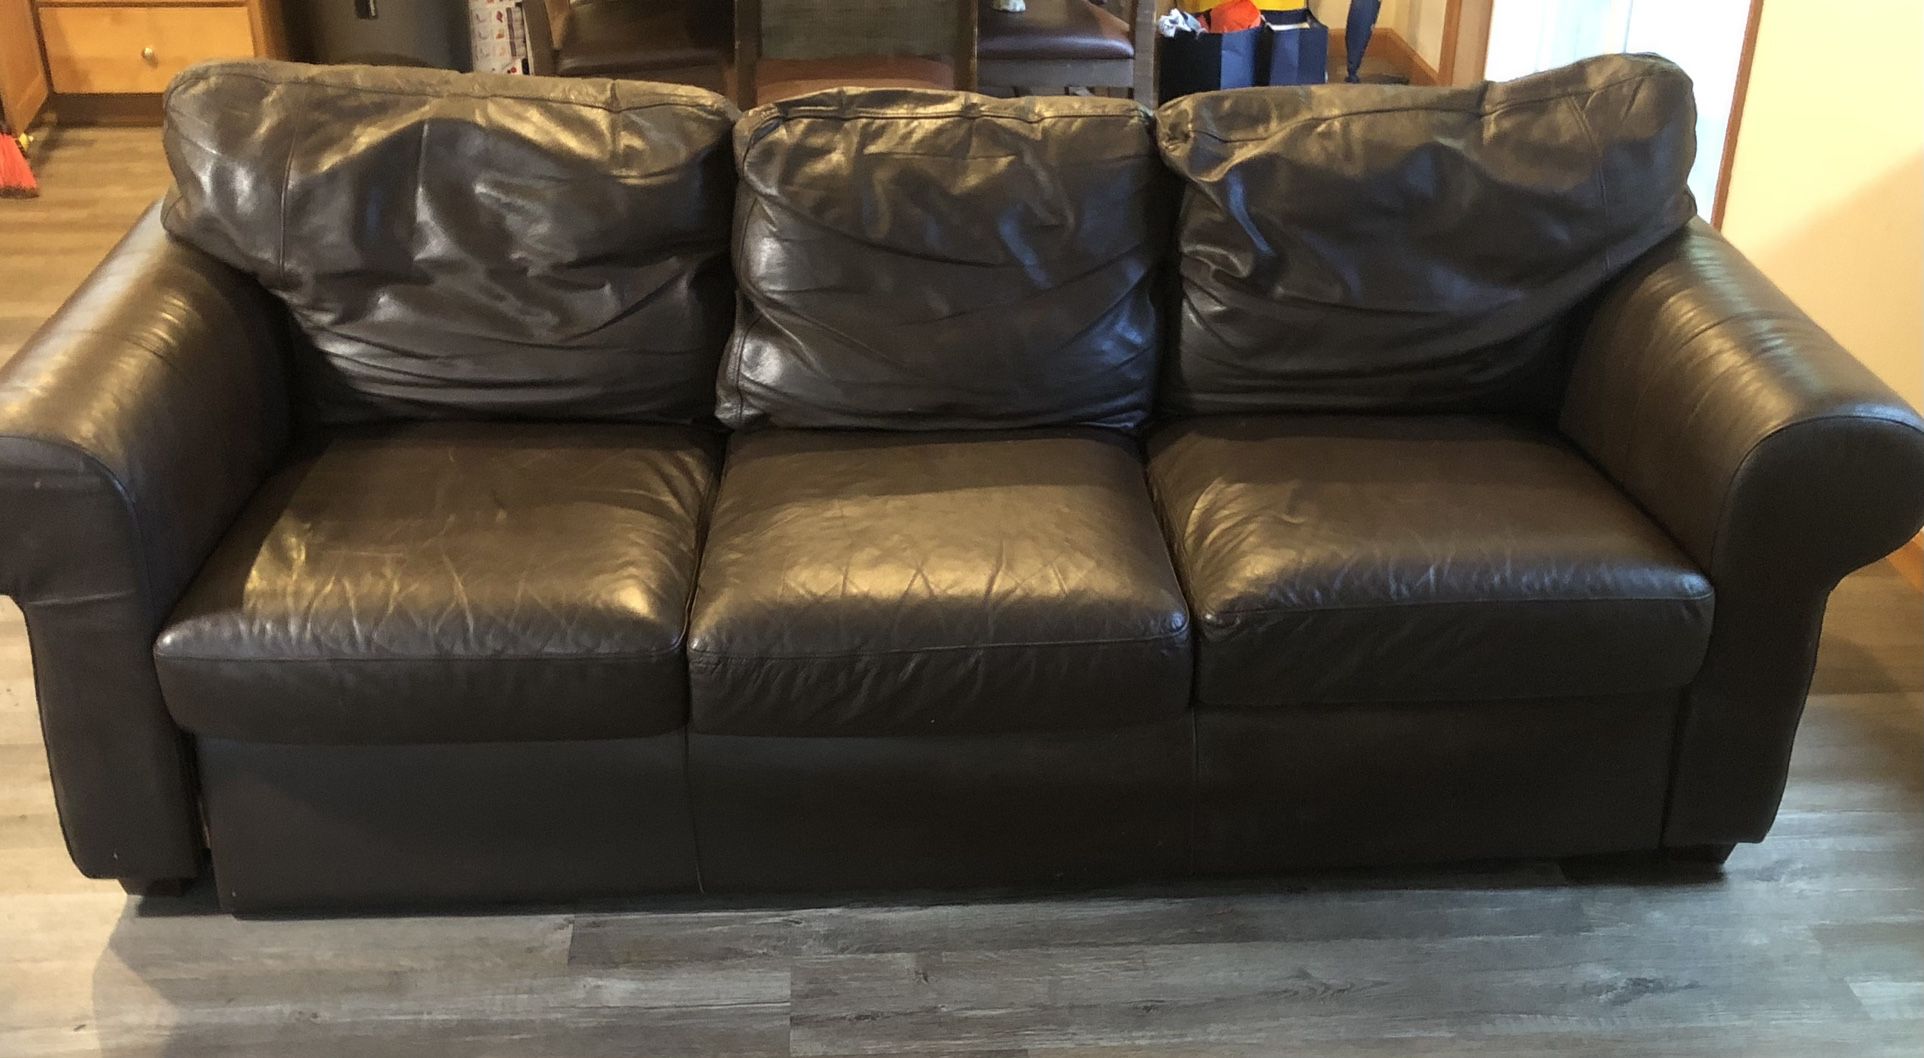 Vintage Brown Leather Couch